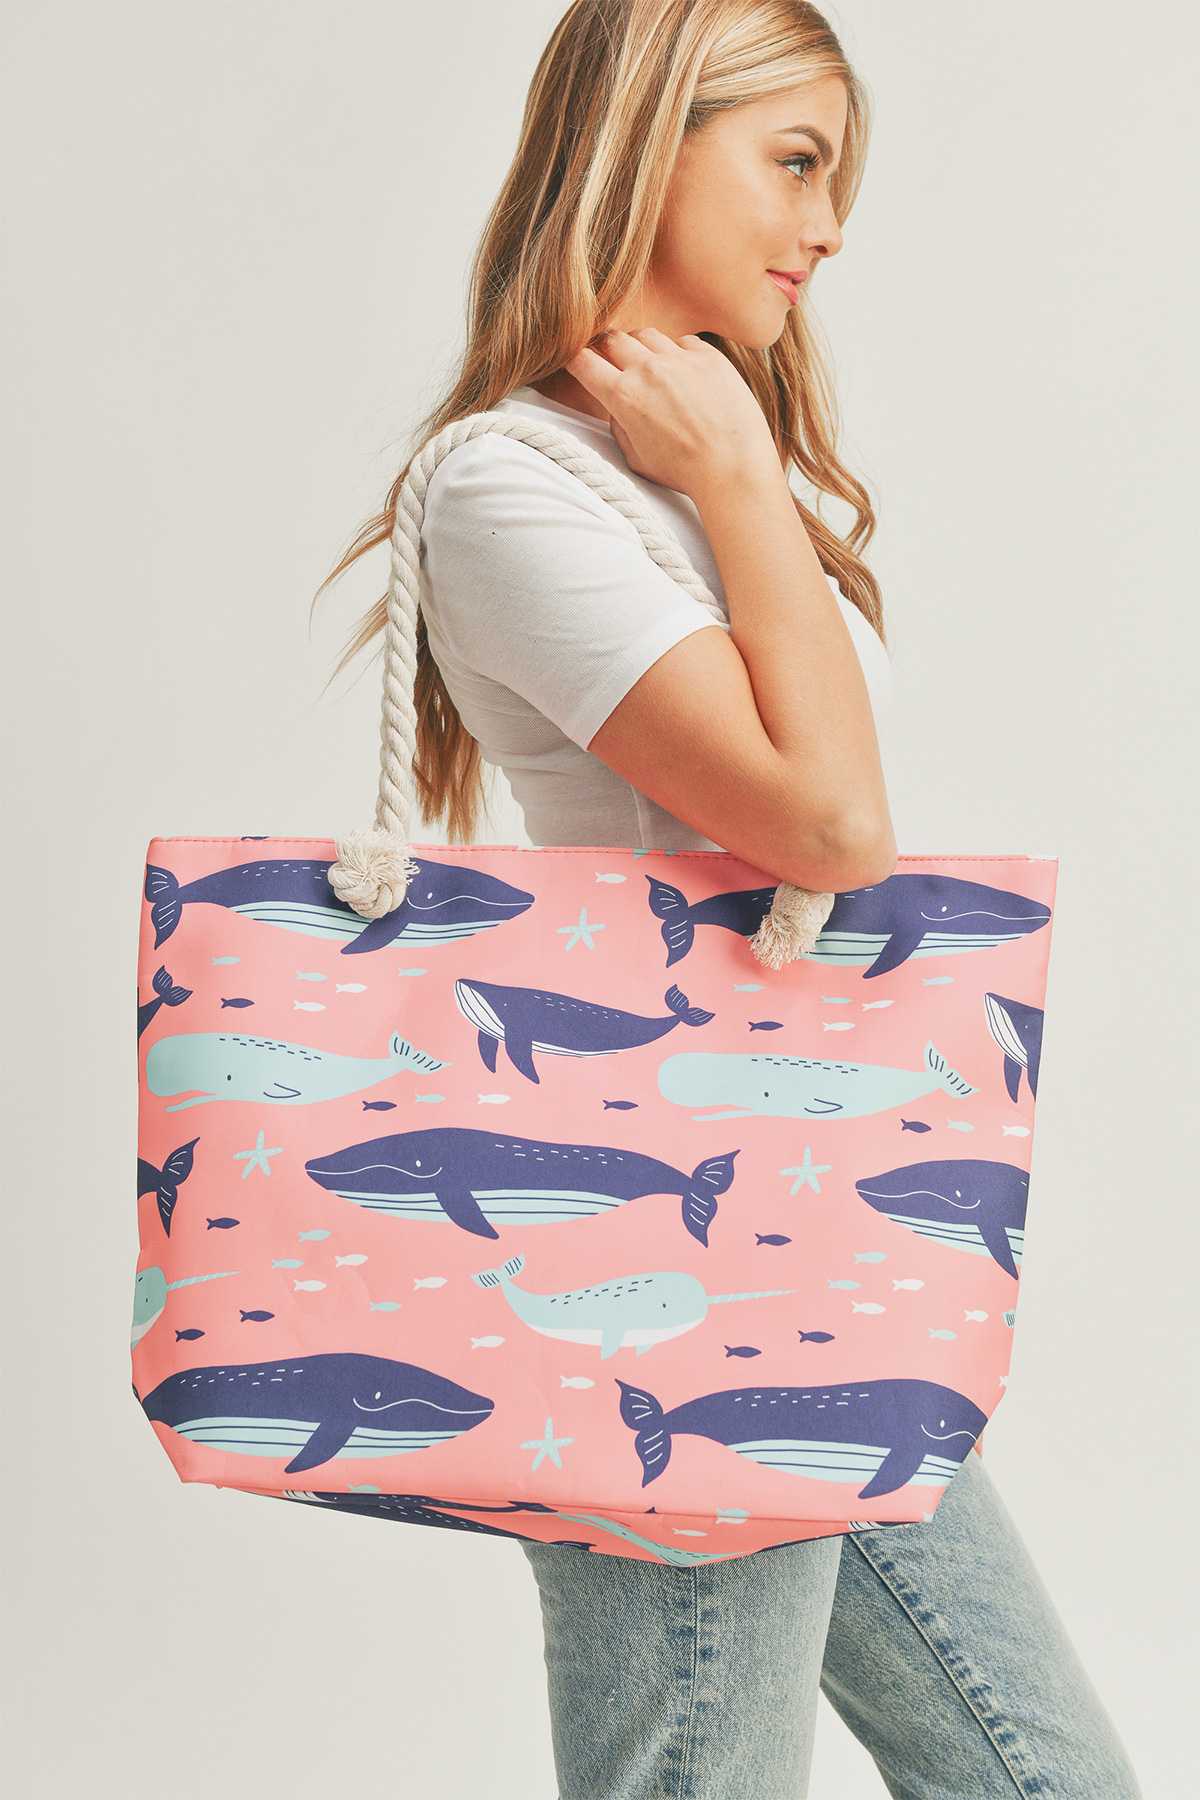 Whale Print Tote Bag With Rope Handles